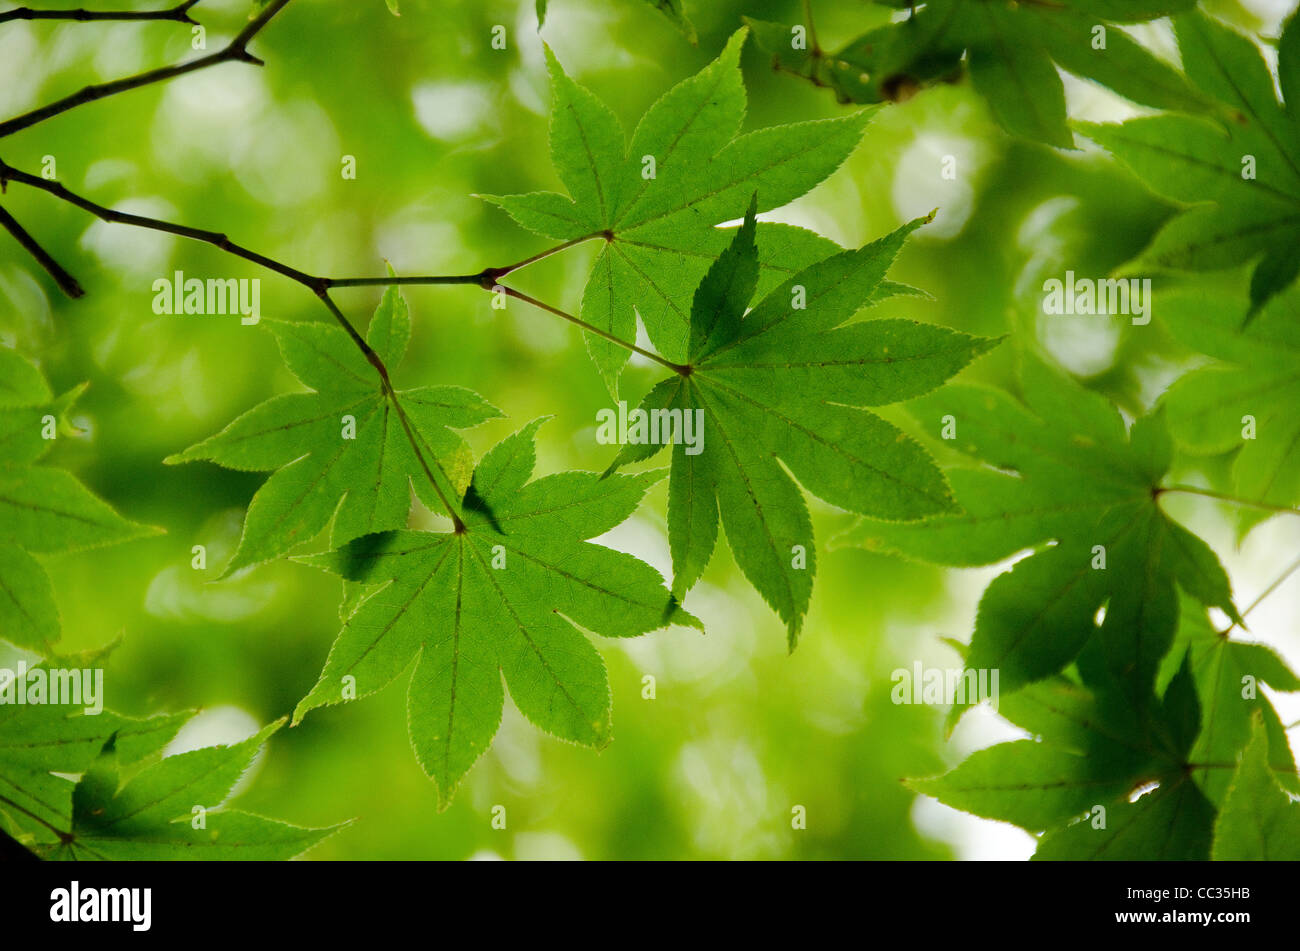 A branch of green maple leaves as background structure Stock Photo